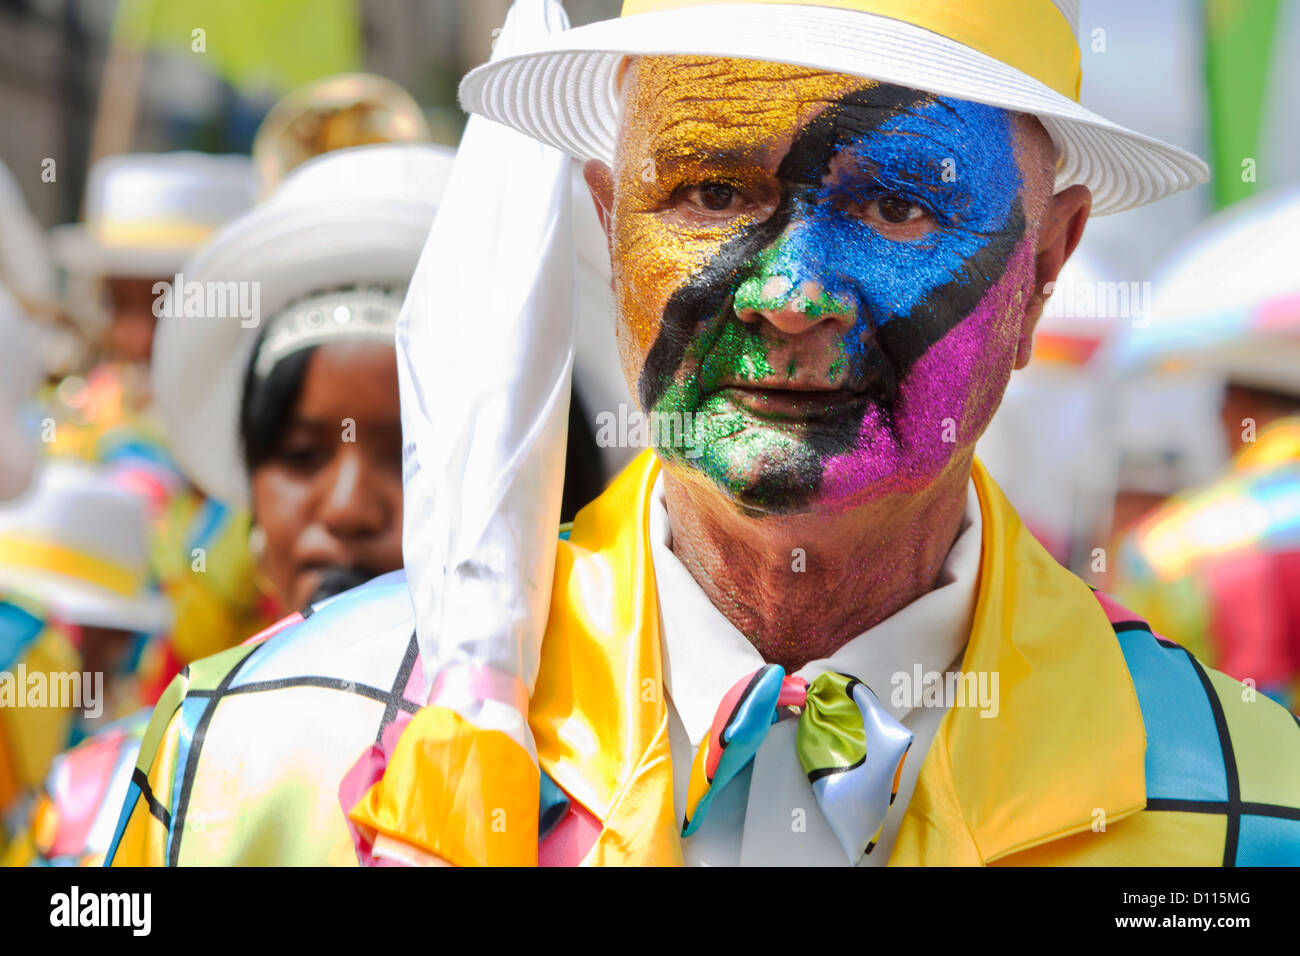 Man with face paint at Minstrel Carnival in South Africa Stock Photo